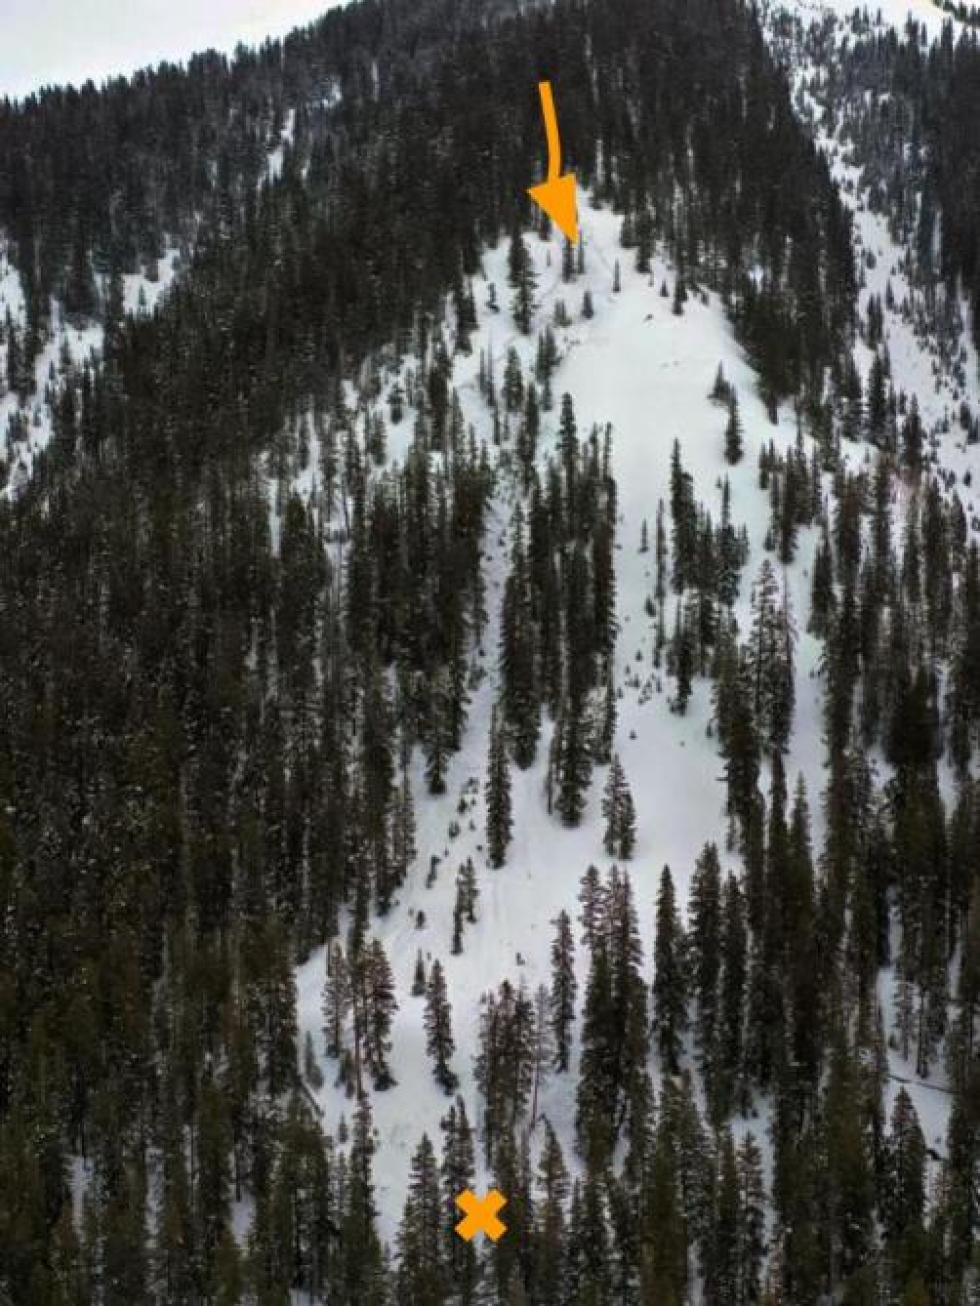 A view of the fatal avalanche outside the town of Ophir. Rider 1 entered the slope along the orange arrow. He was carried downhill and partially buried at the orange X near the toe of the debris. (Image taken on January 23, 2024) 